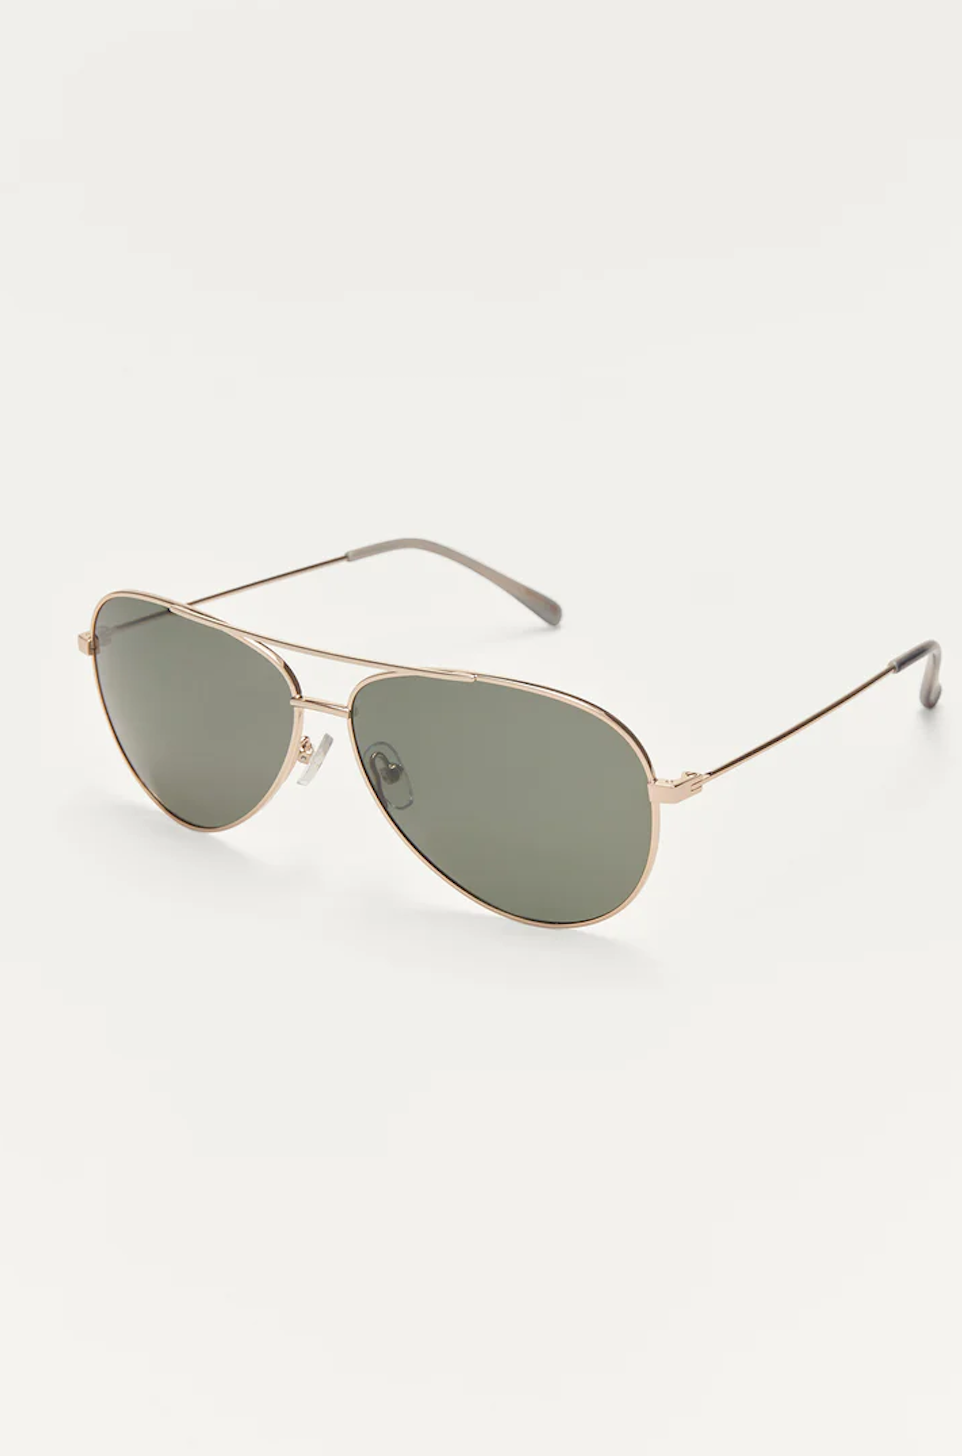 Z SUPPLY DRIVER SUNGLASSES IN GOLD GREY